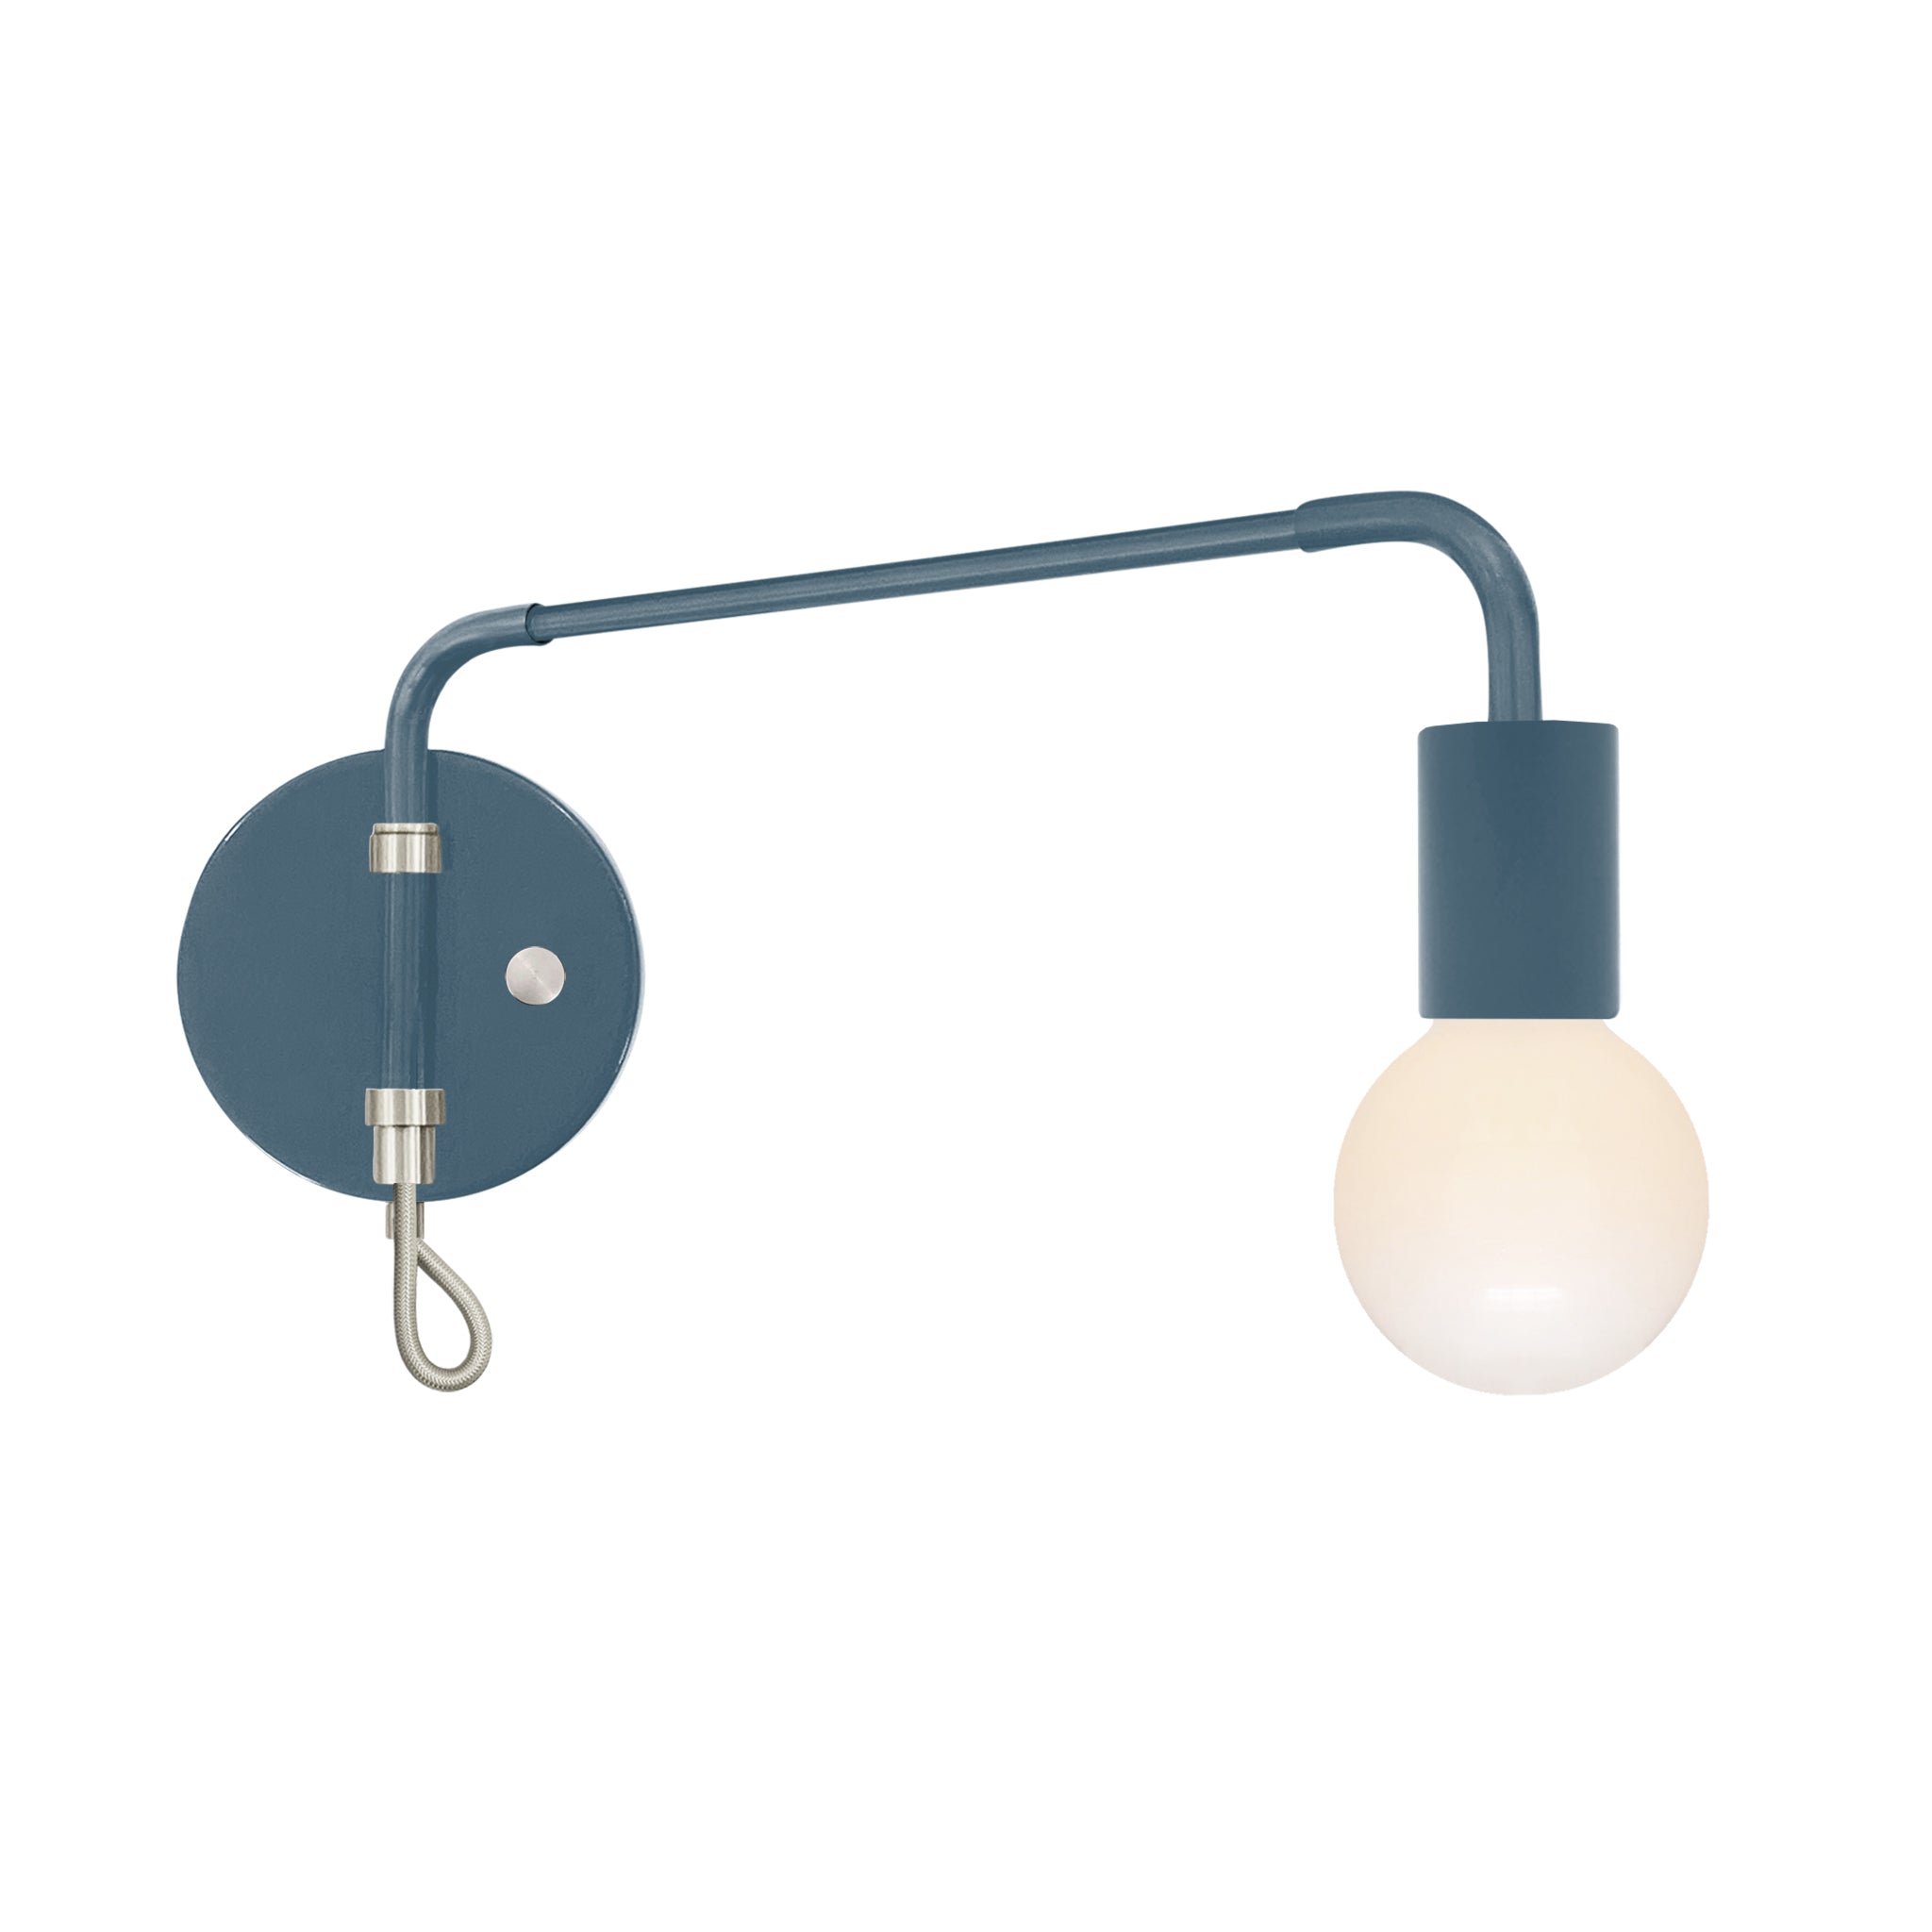 Nickel and slate blue color Sway sconce Dutton Brown lighting